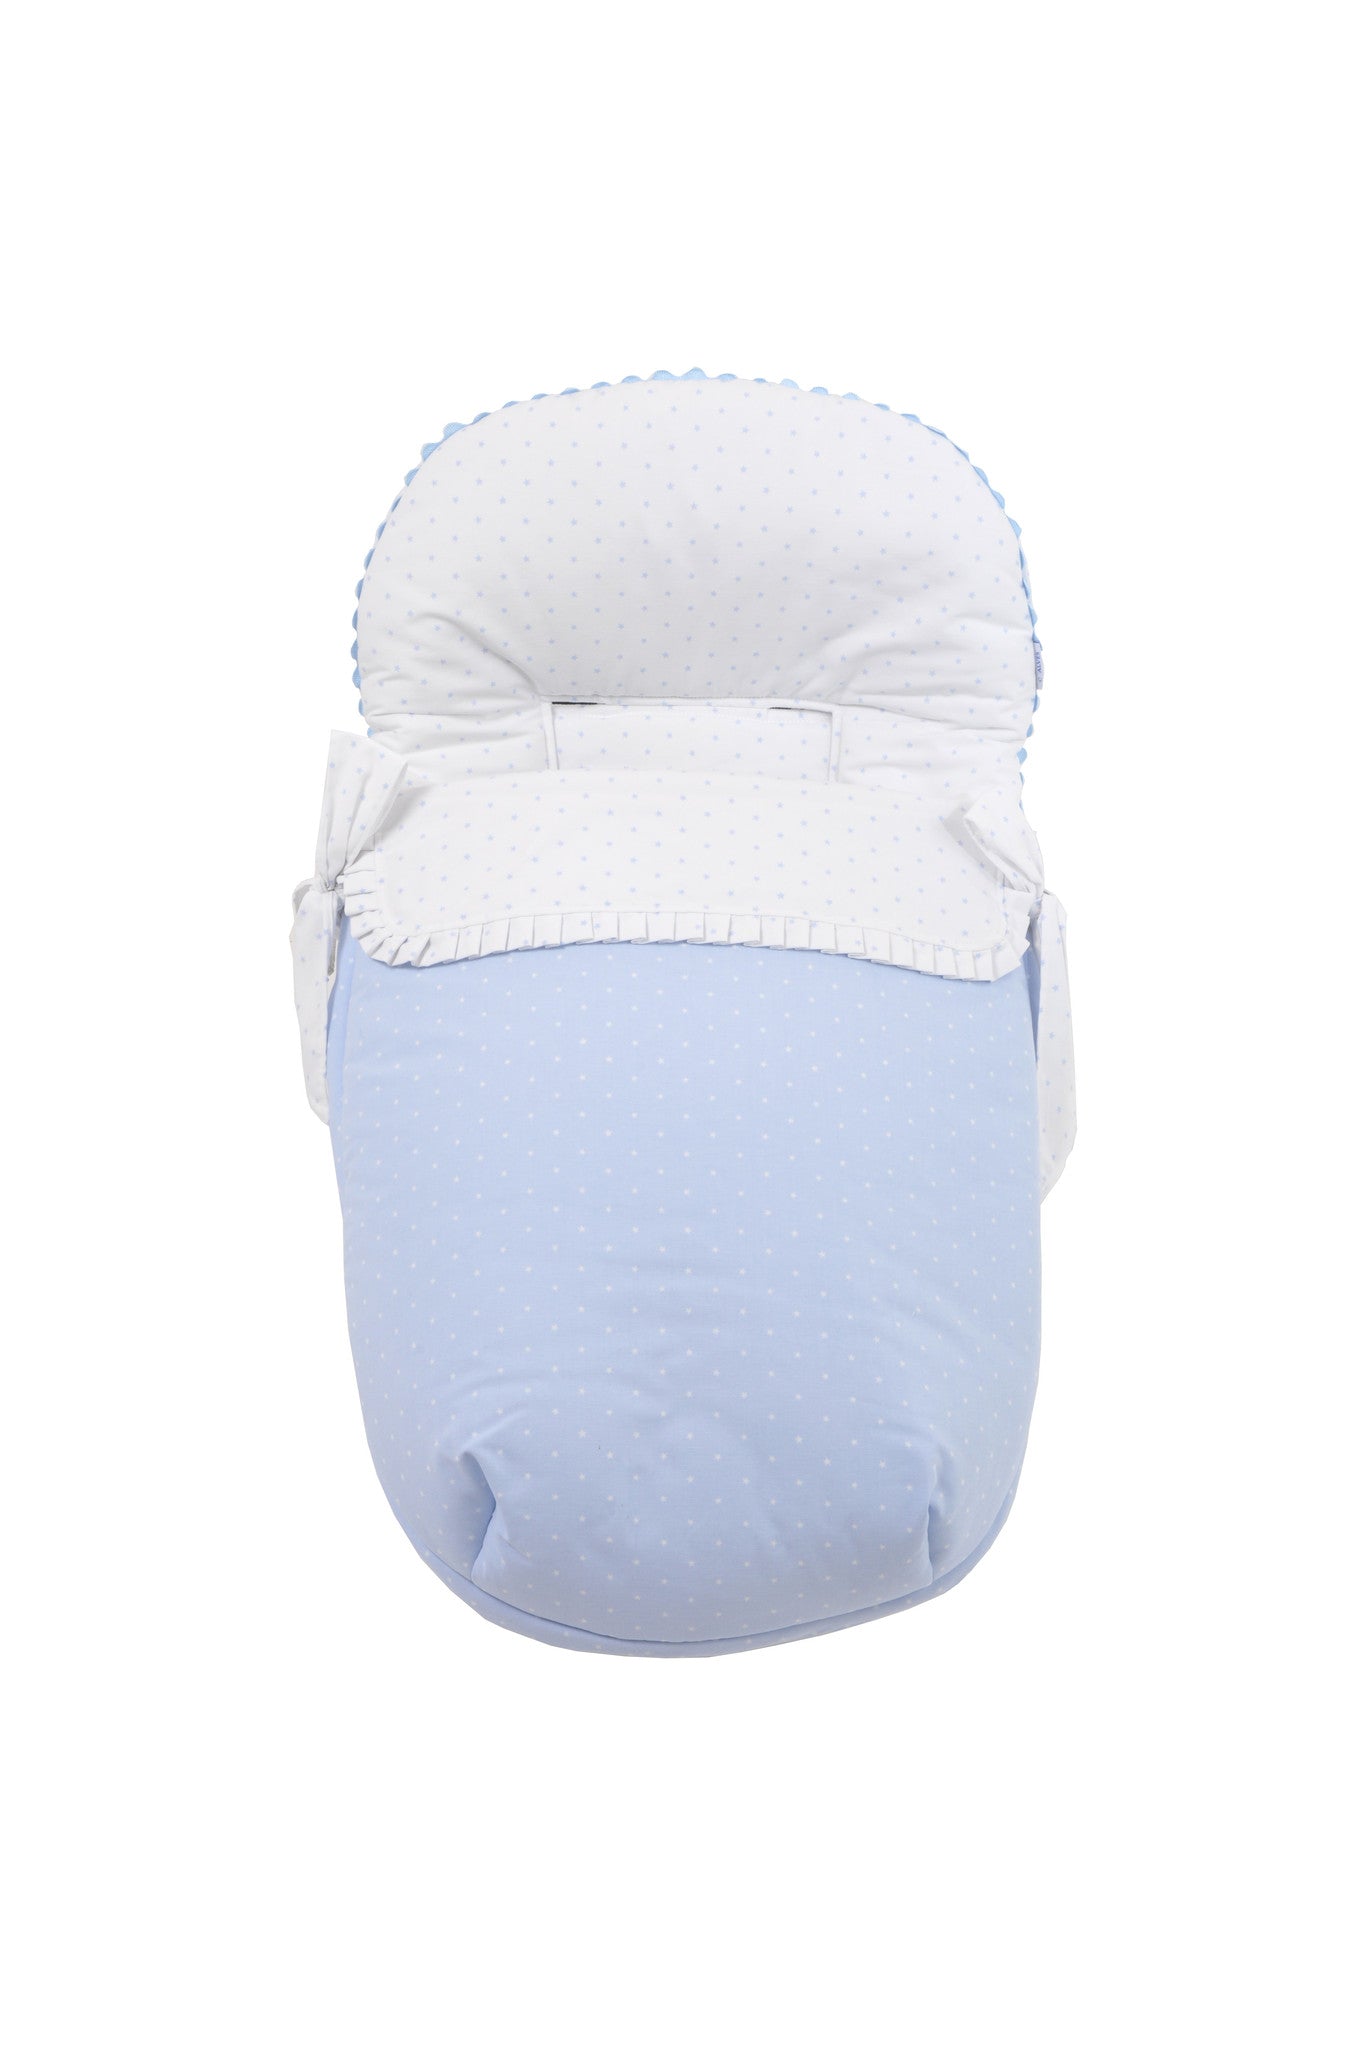 Stroller Universal Cotton Cover and Liner- Blue Star Collection